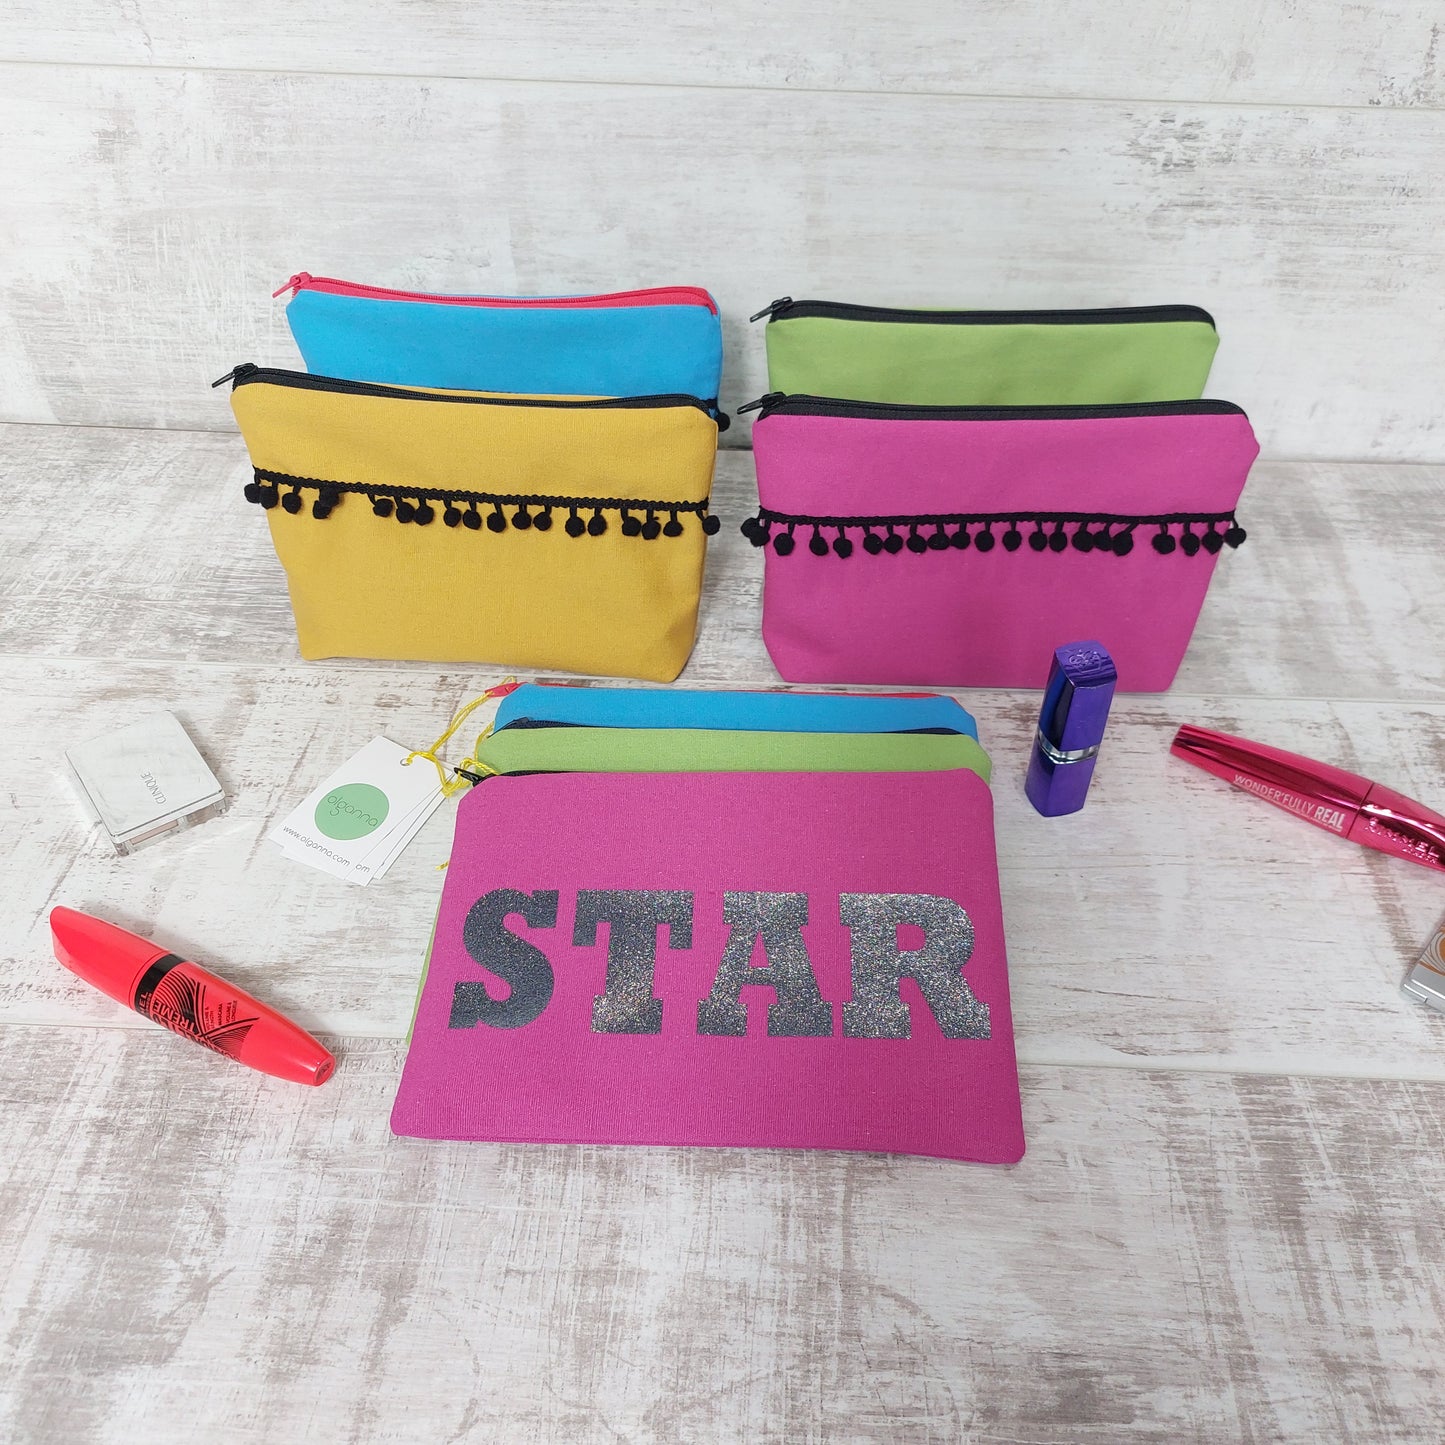 'Star' Pink Make Up Pouch with zip